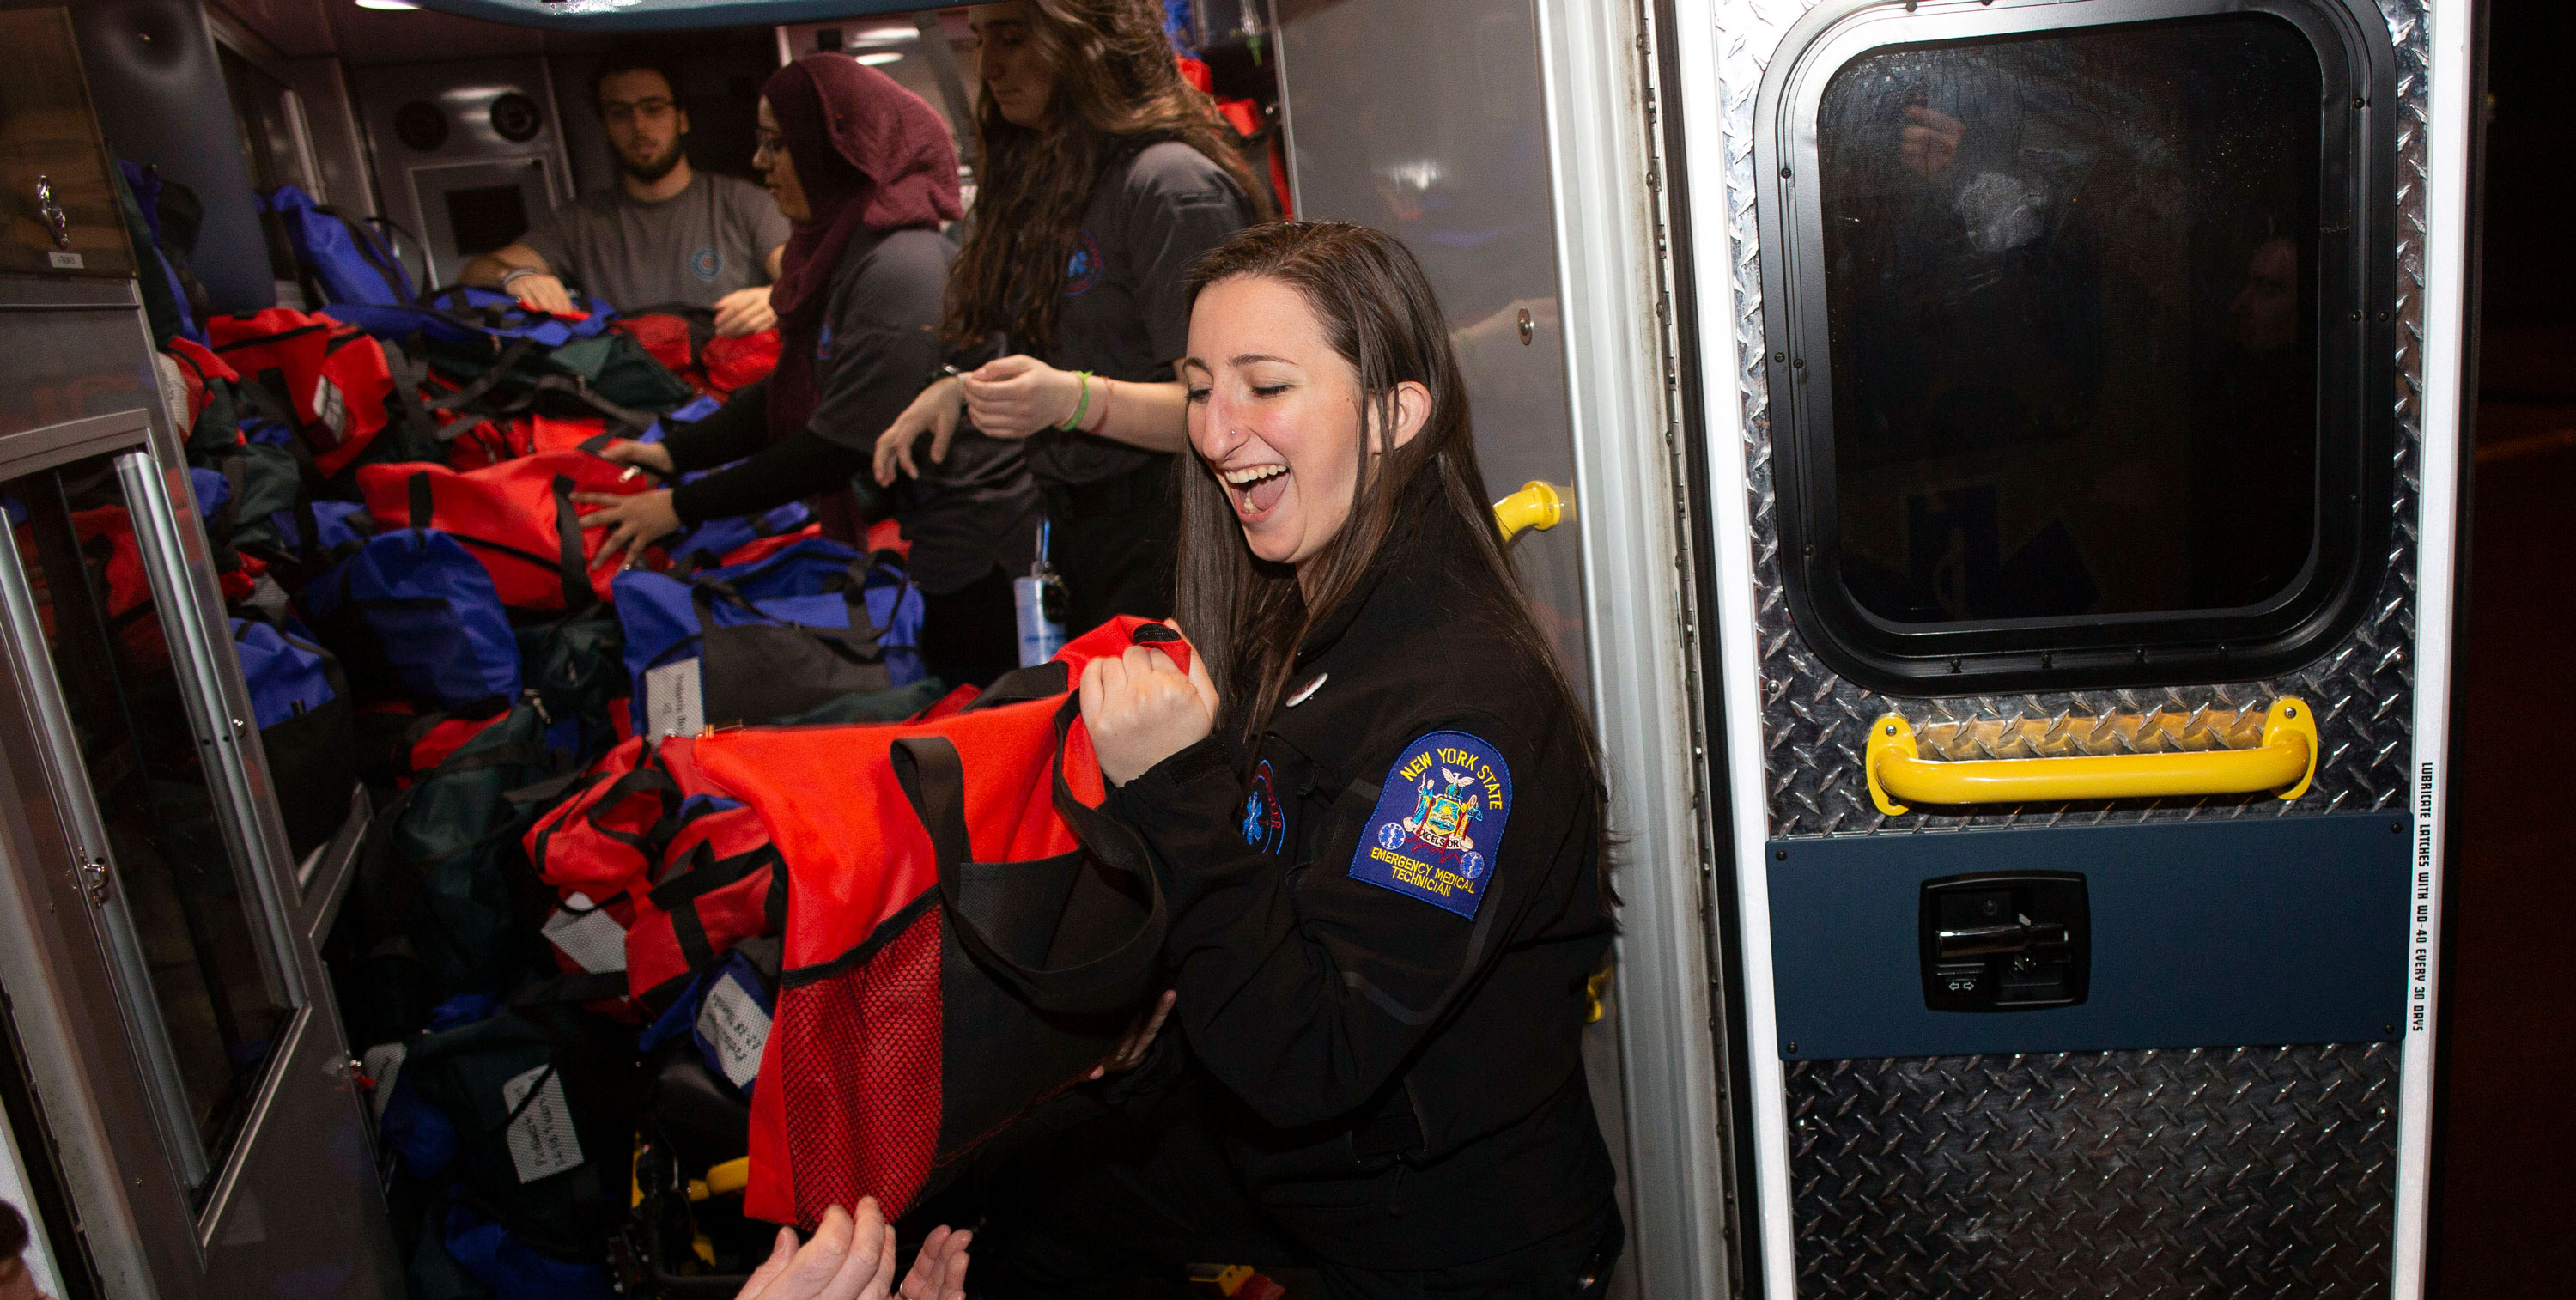 A Five Quad Ambulance volunteer smiles as she hands off a duffel bag and grabs another as the group loads up an ambulance with donated supplies.